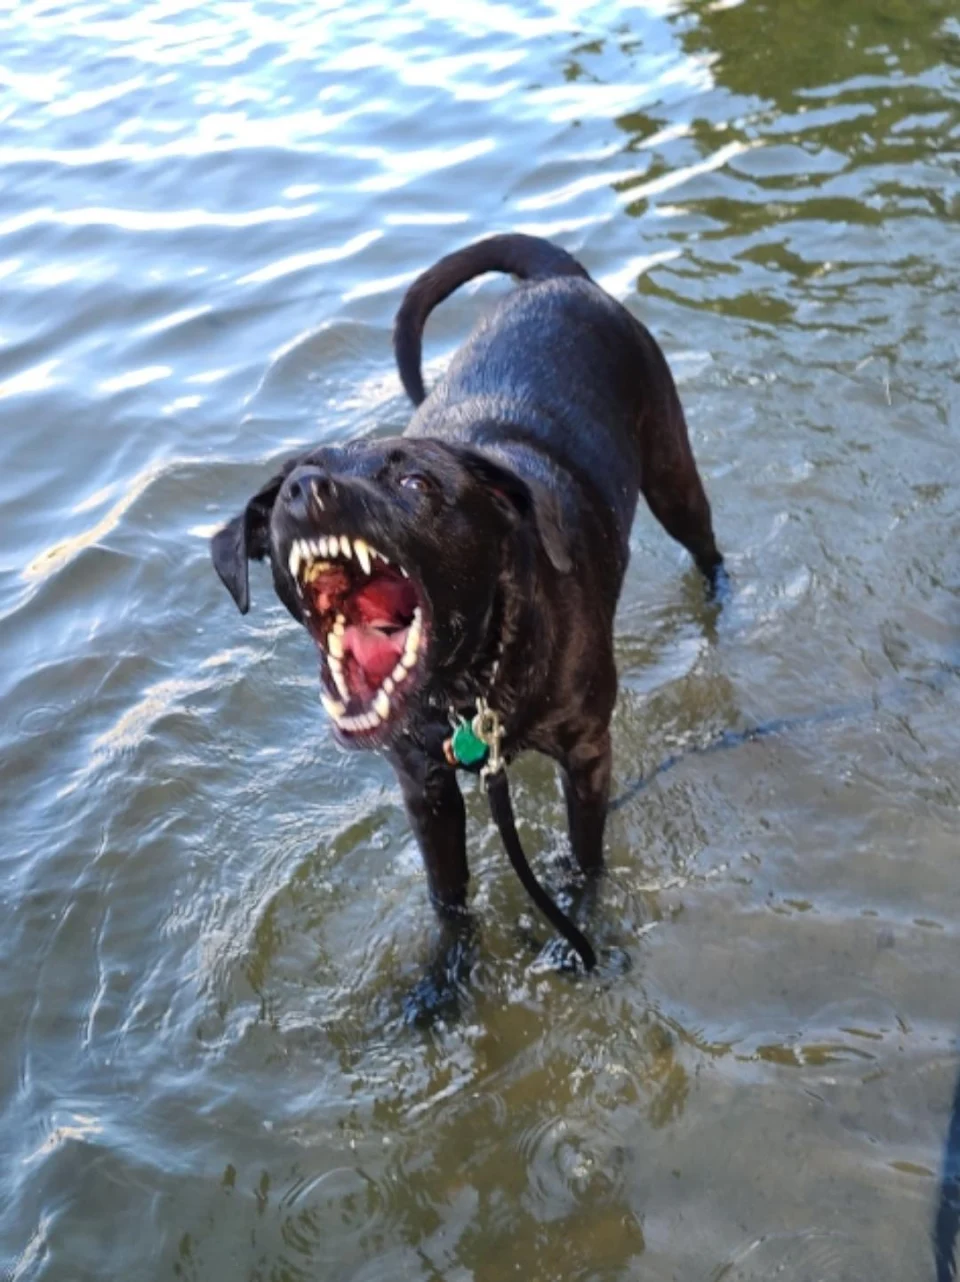 Dog mid-bark in a river